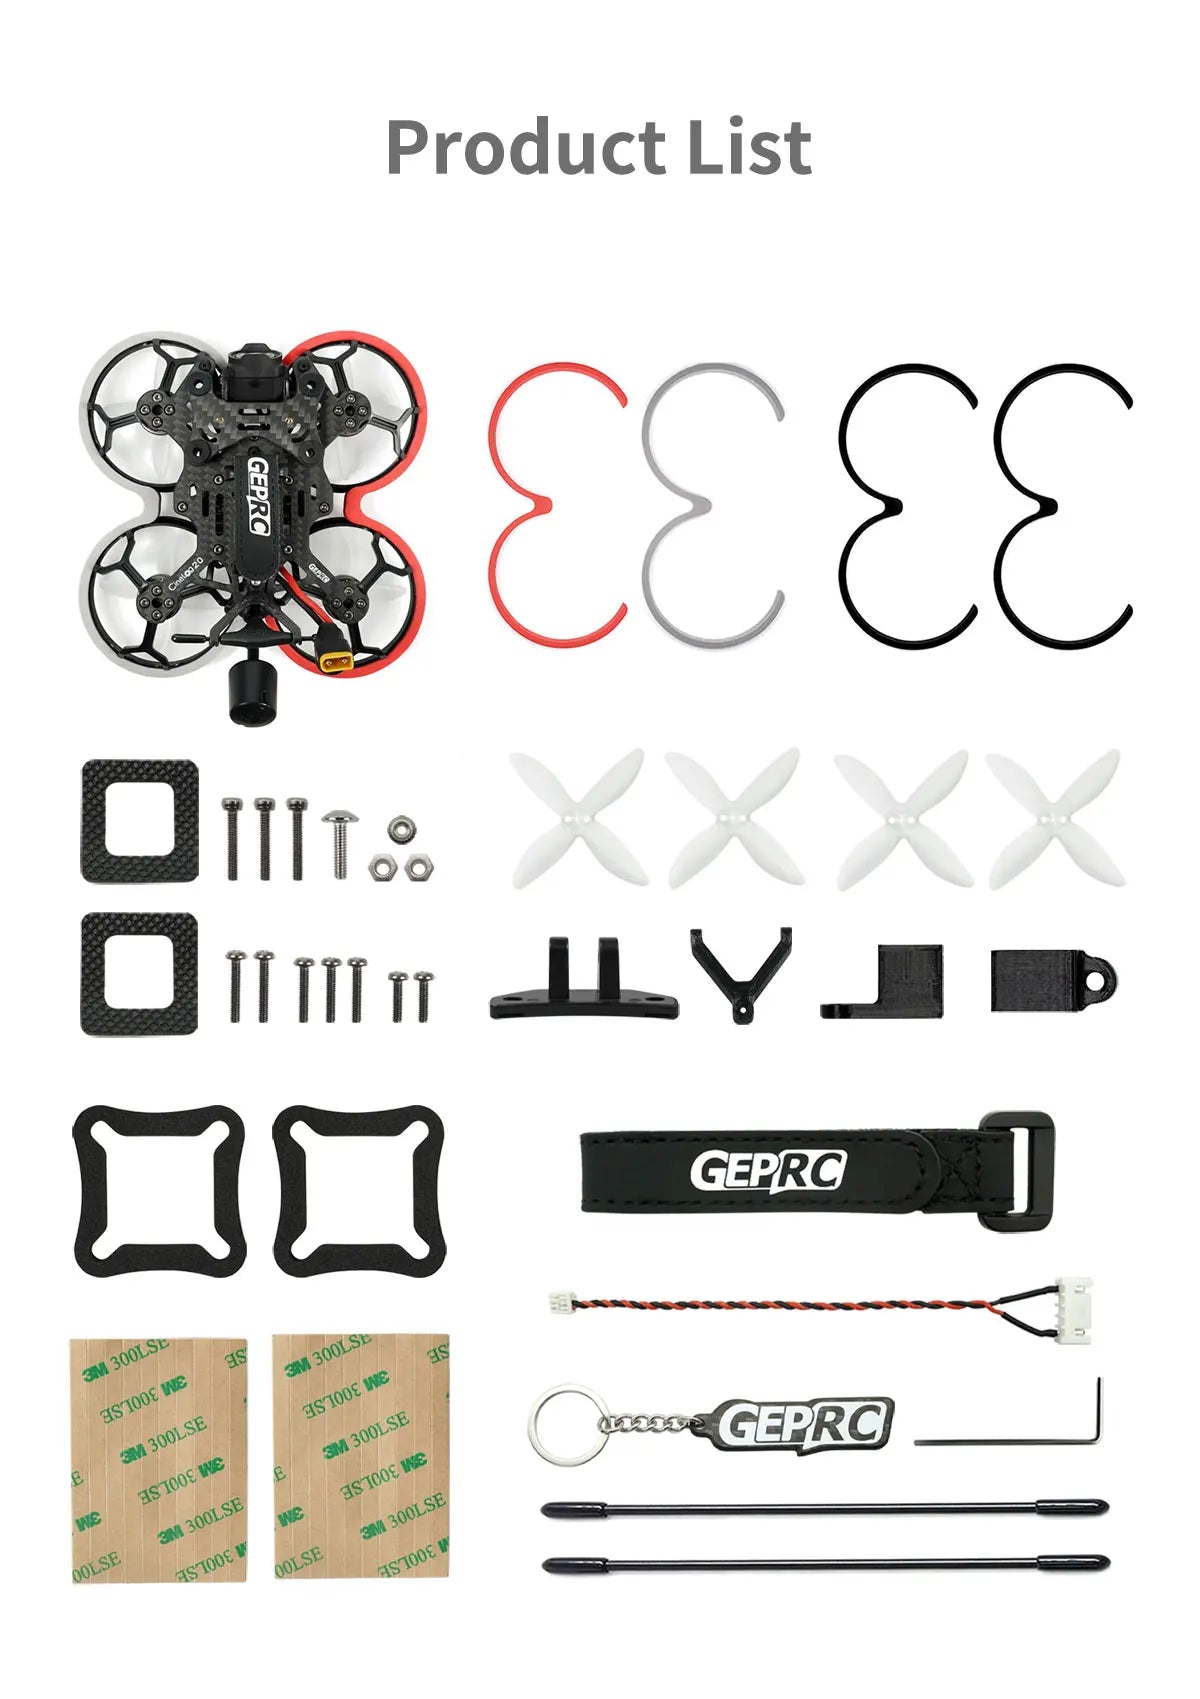 GEPRC Cinelog20 HD Wasp FPV Drone, the CineLog20 is a lightweight pusher design . the camera gimbal